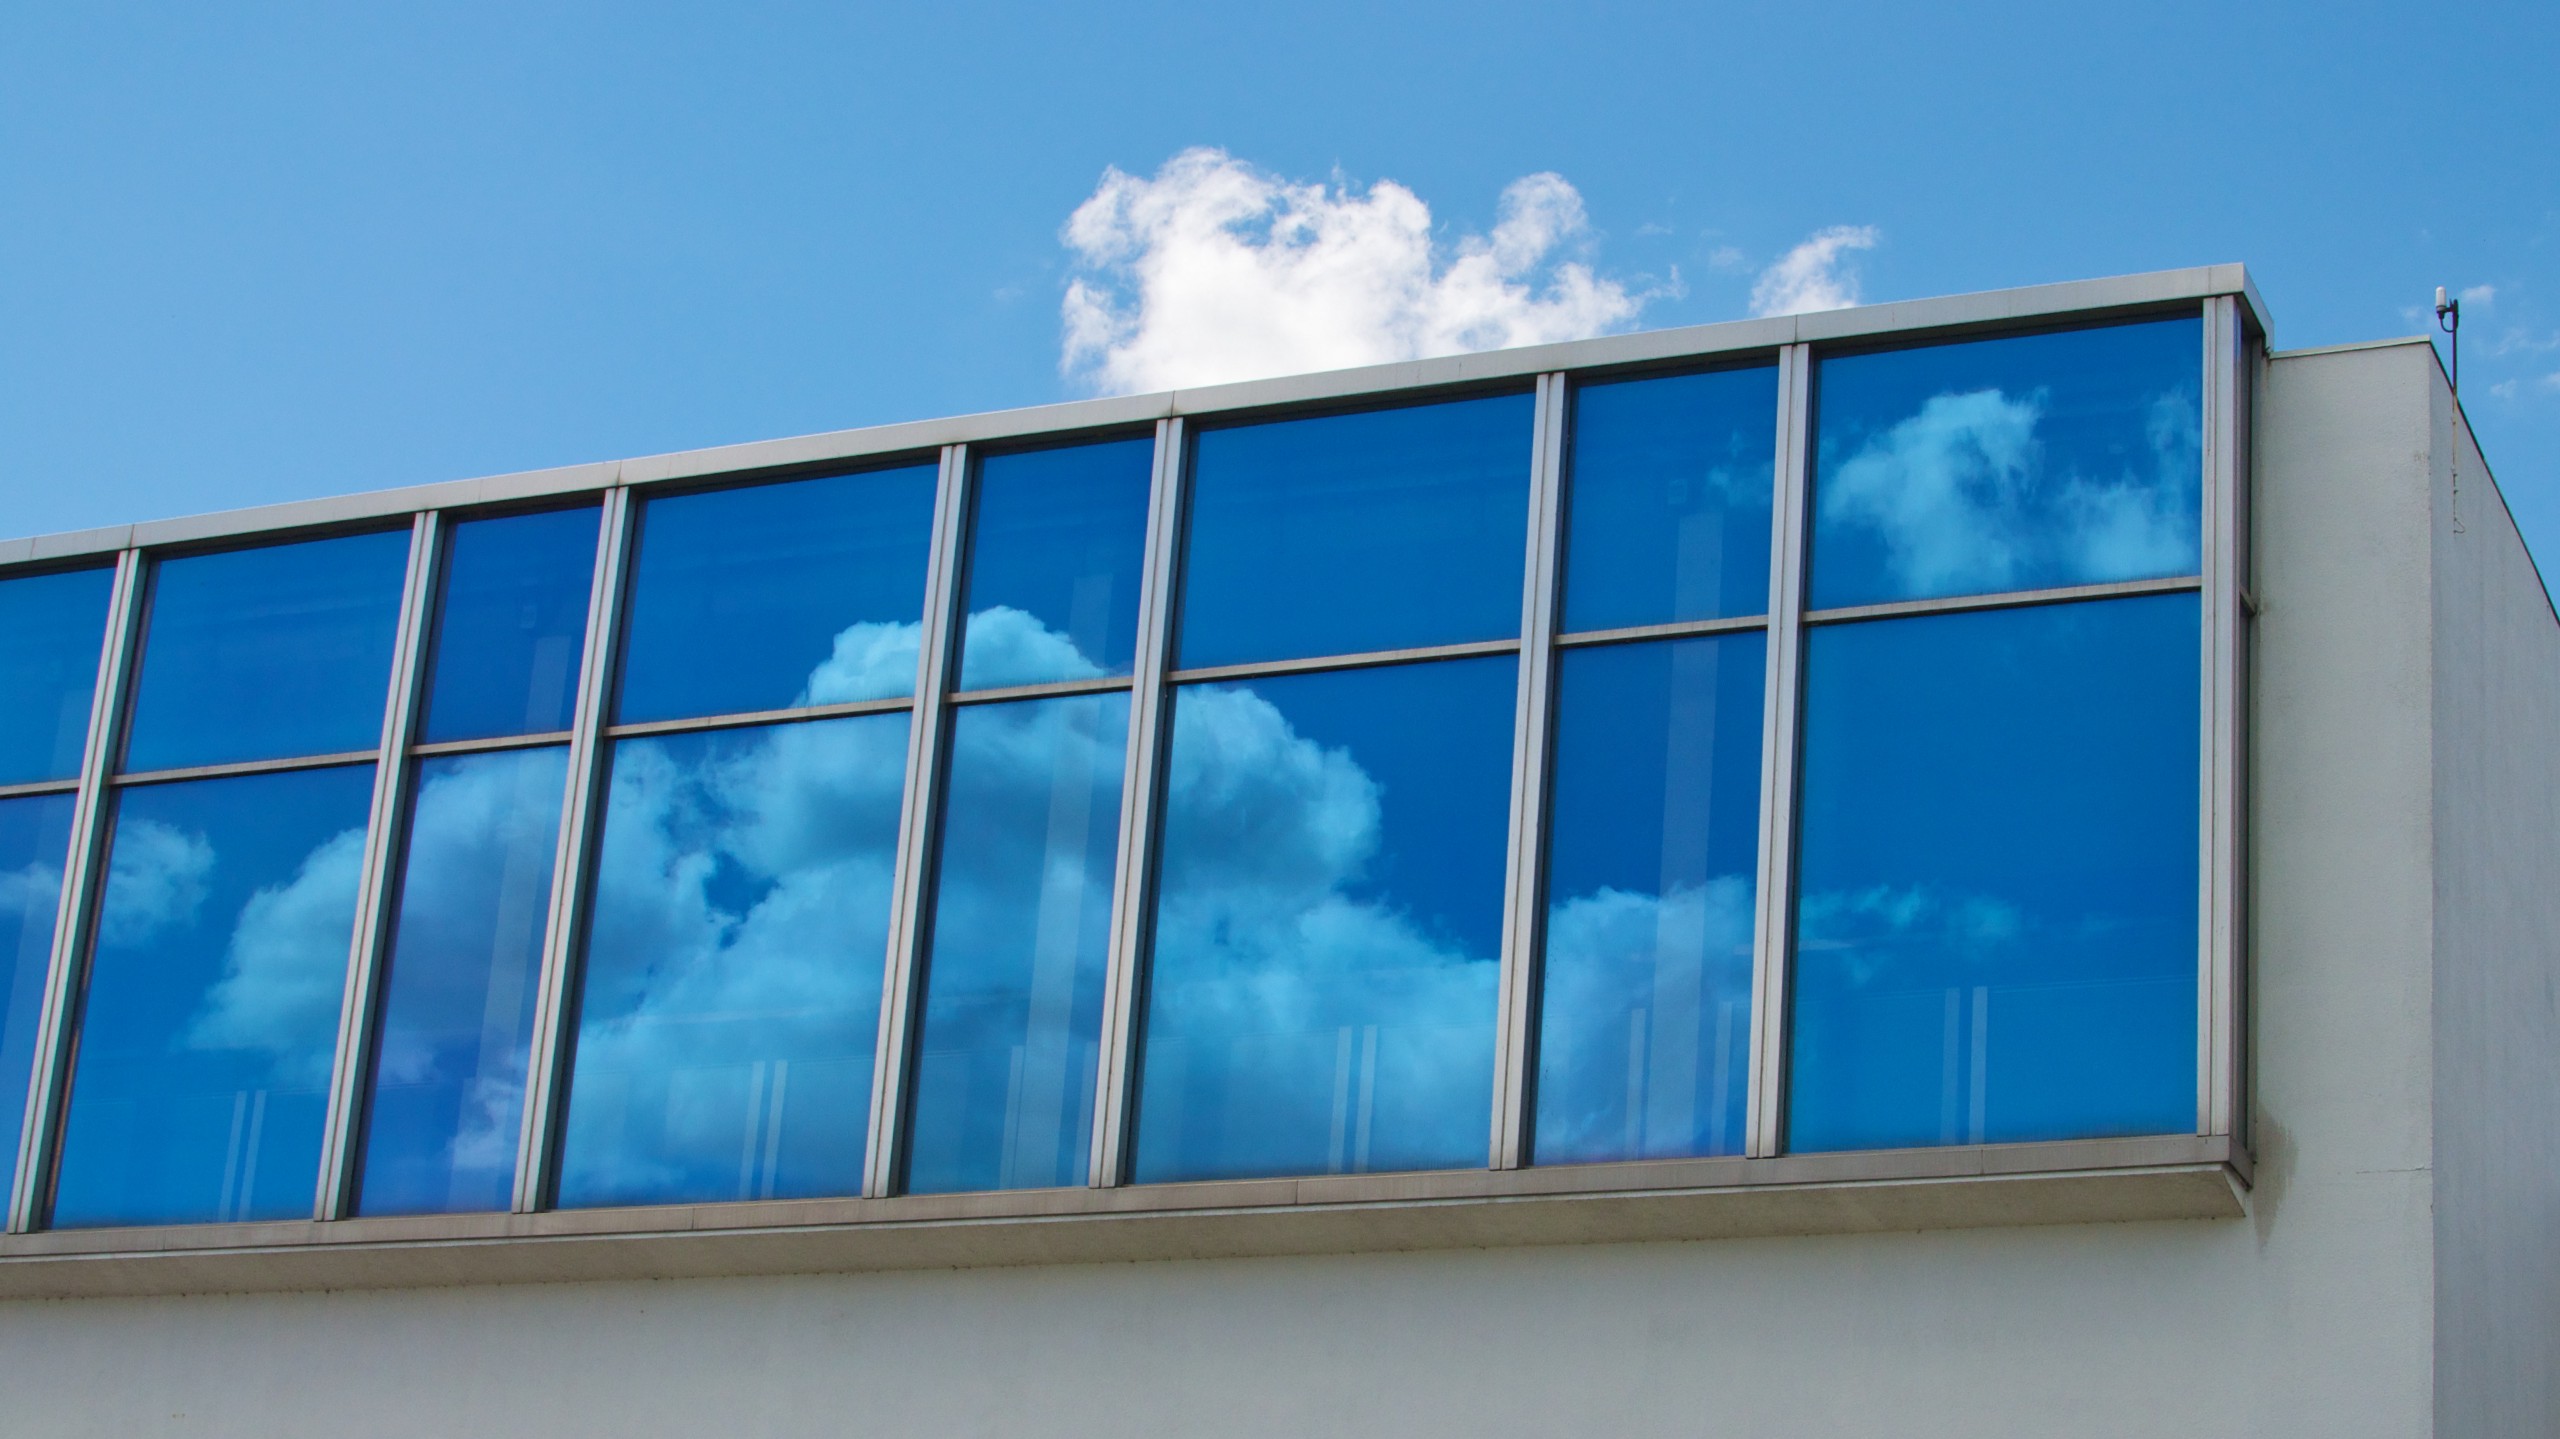 Clouds reflected in windows.